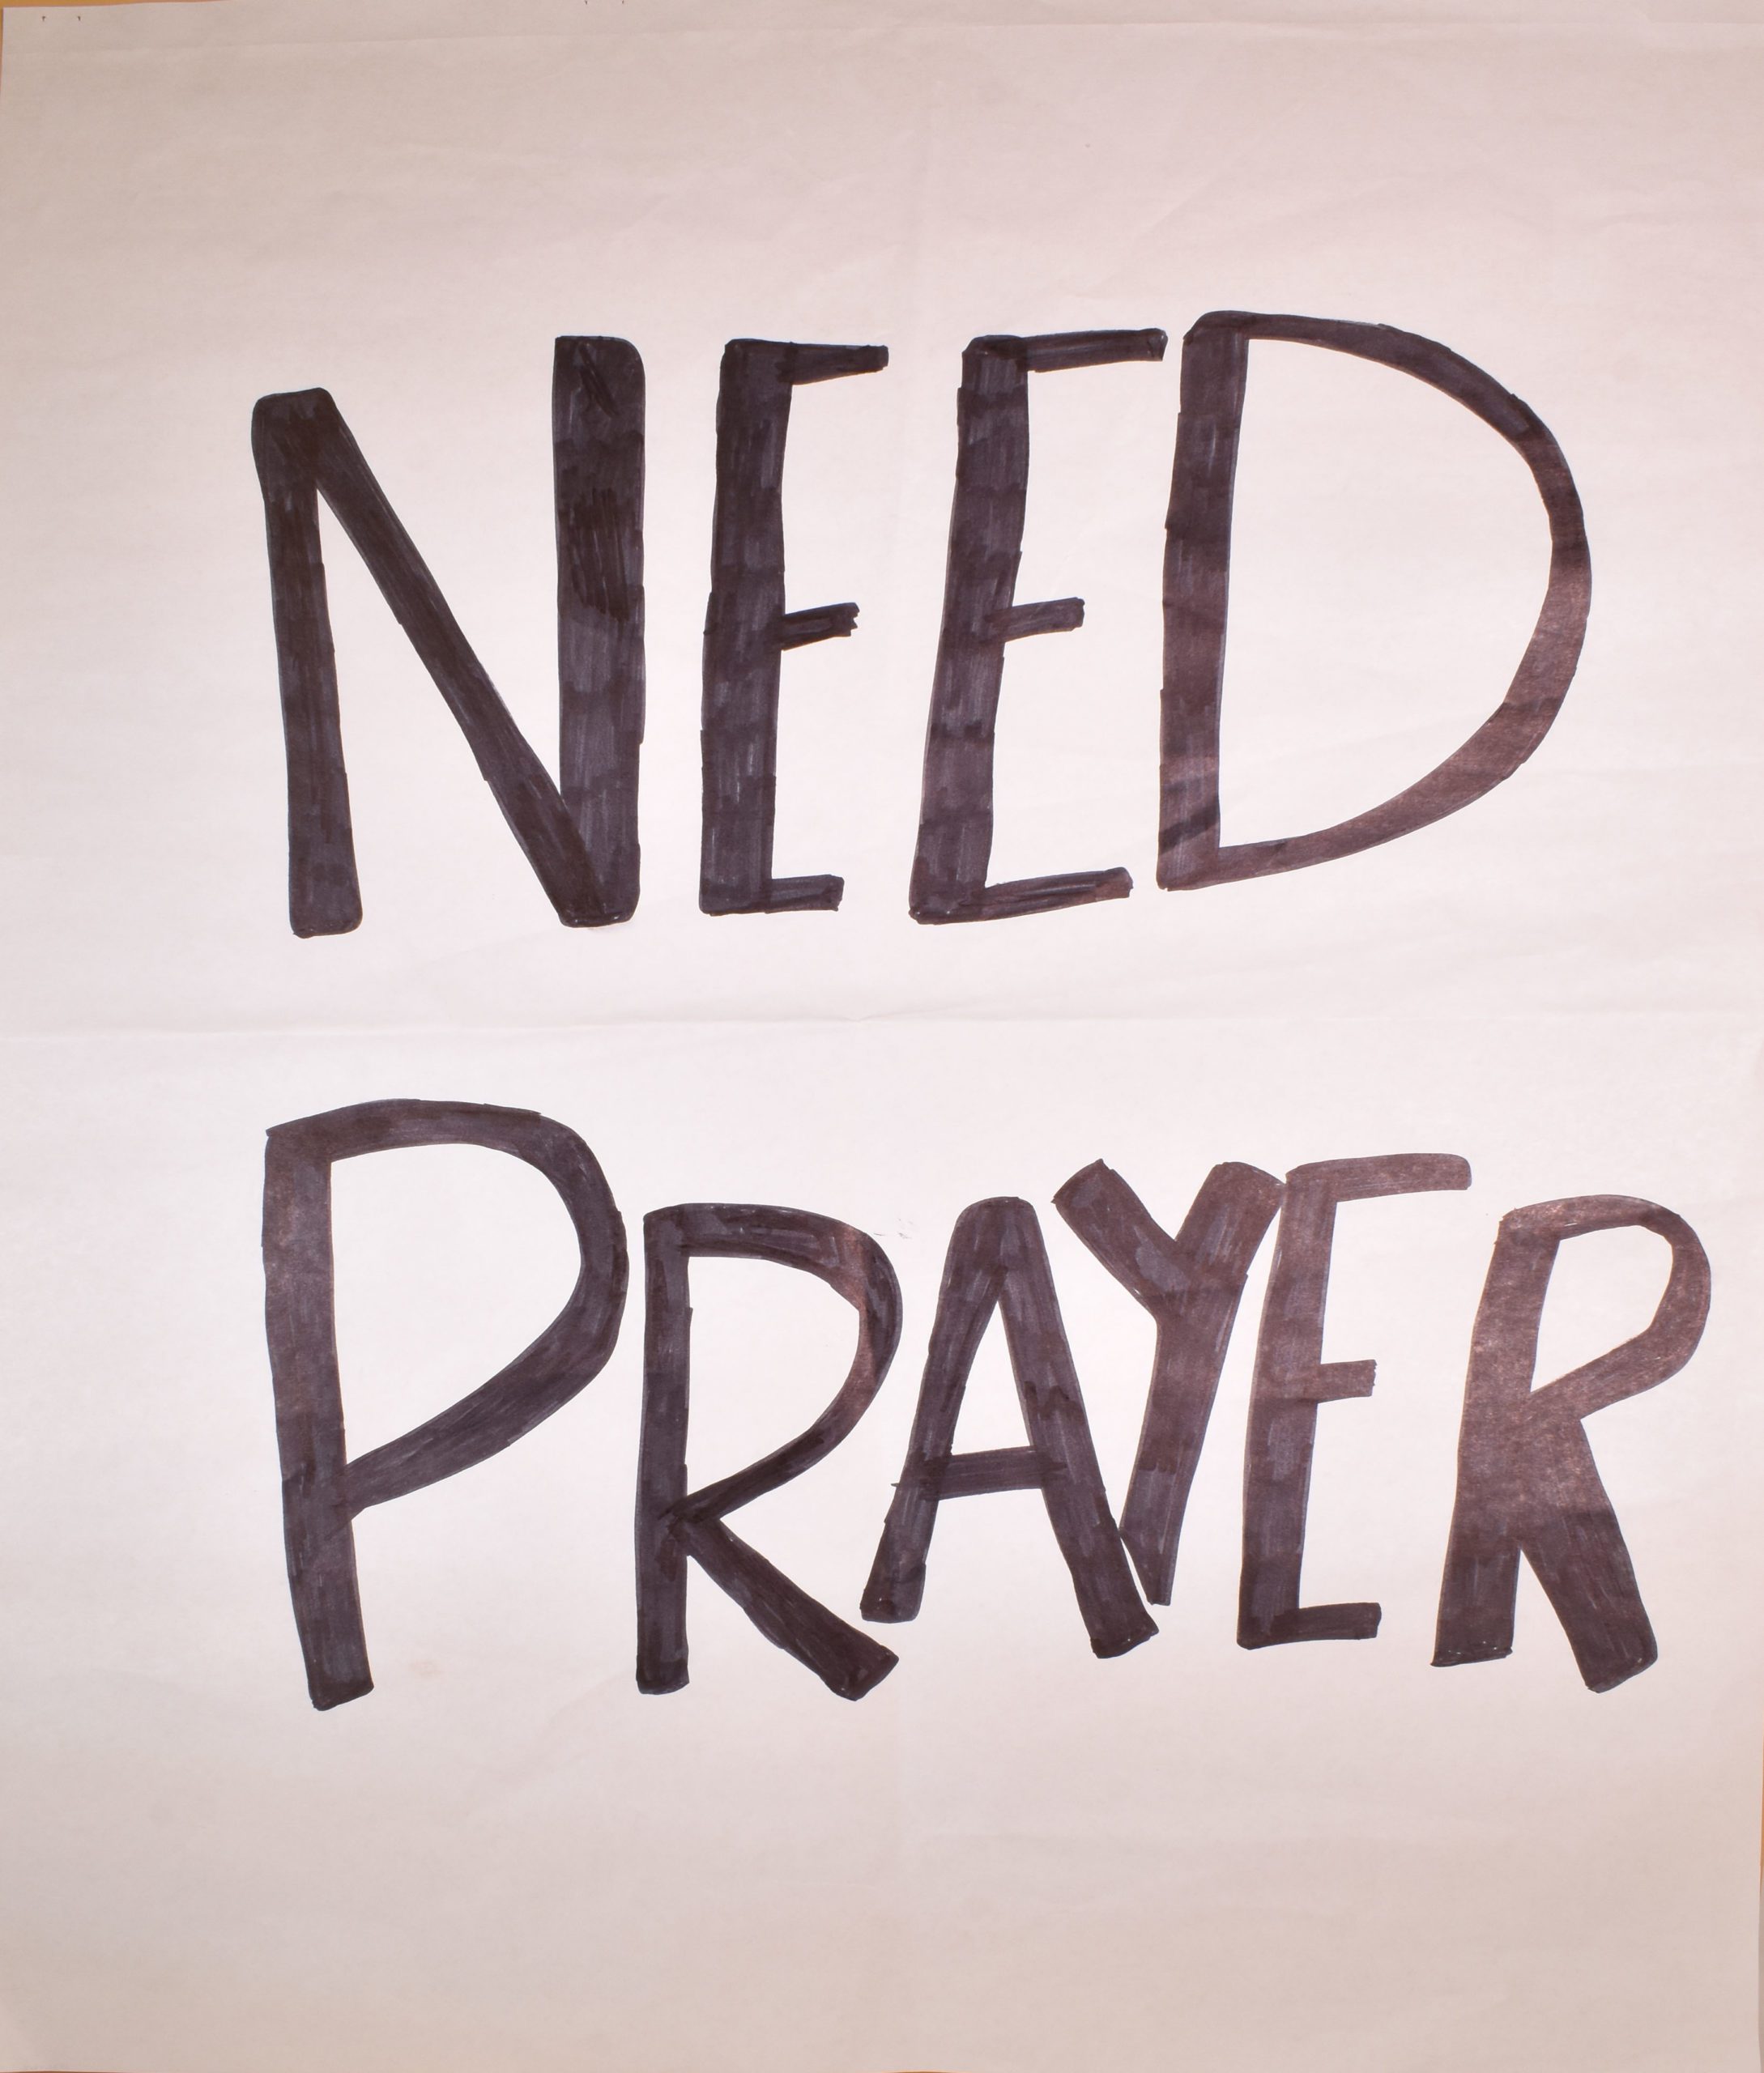 A hand made sign on white paper with "Need Prayer" written in black marker